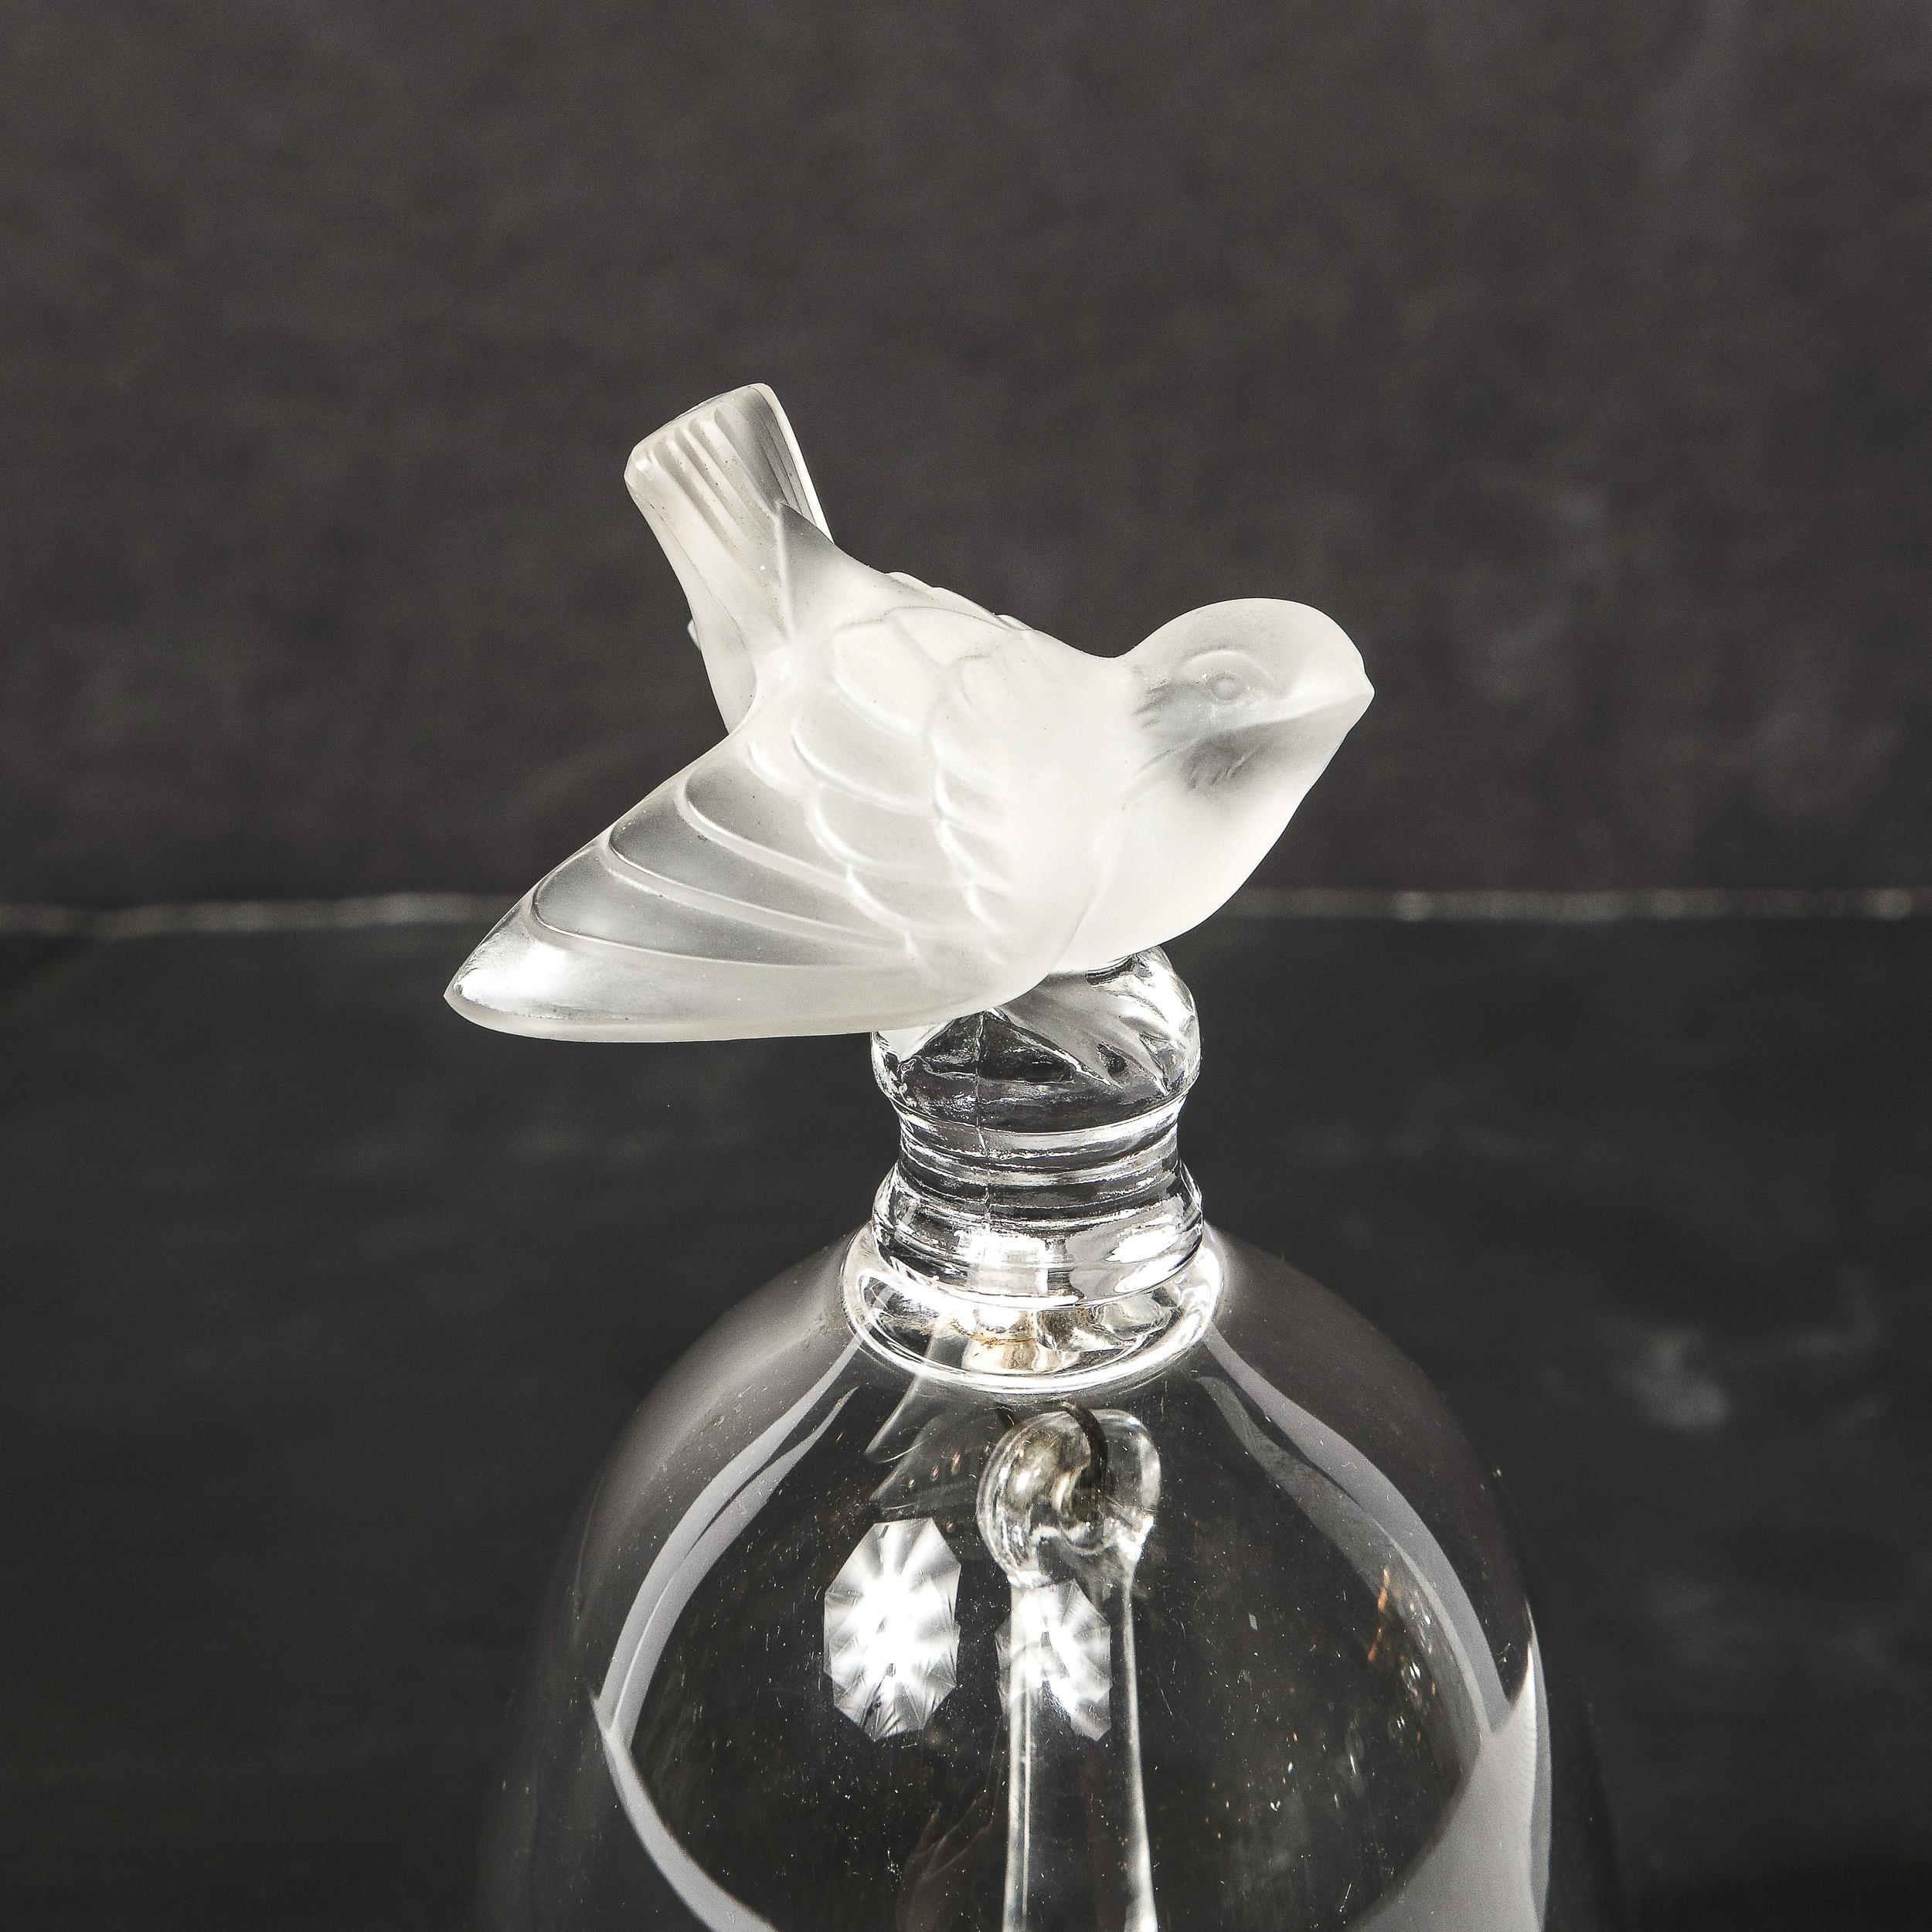 This charming glass bell originates from France, Circa 1925. The handle is in frosted glass and takes the form of a small bird. The sparrow appears to have just briefly landed on a lone bell's handle and is seen glancing upwards quickly